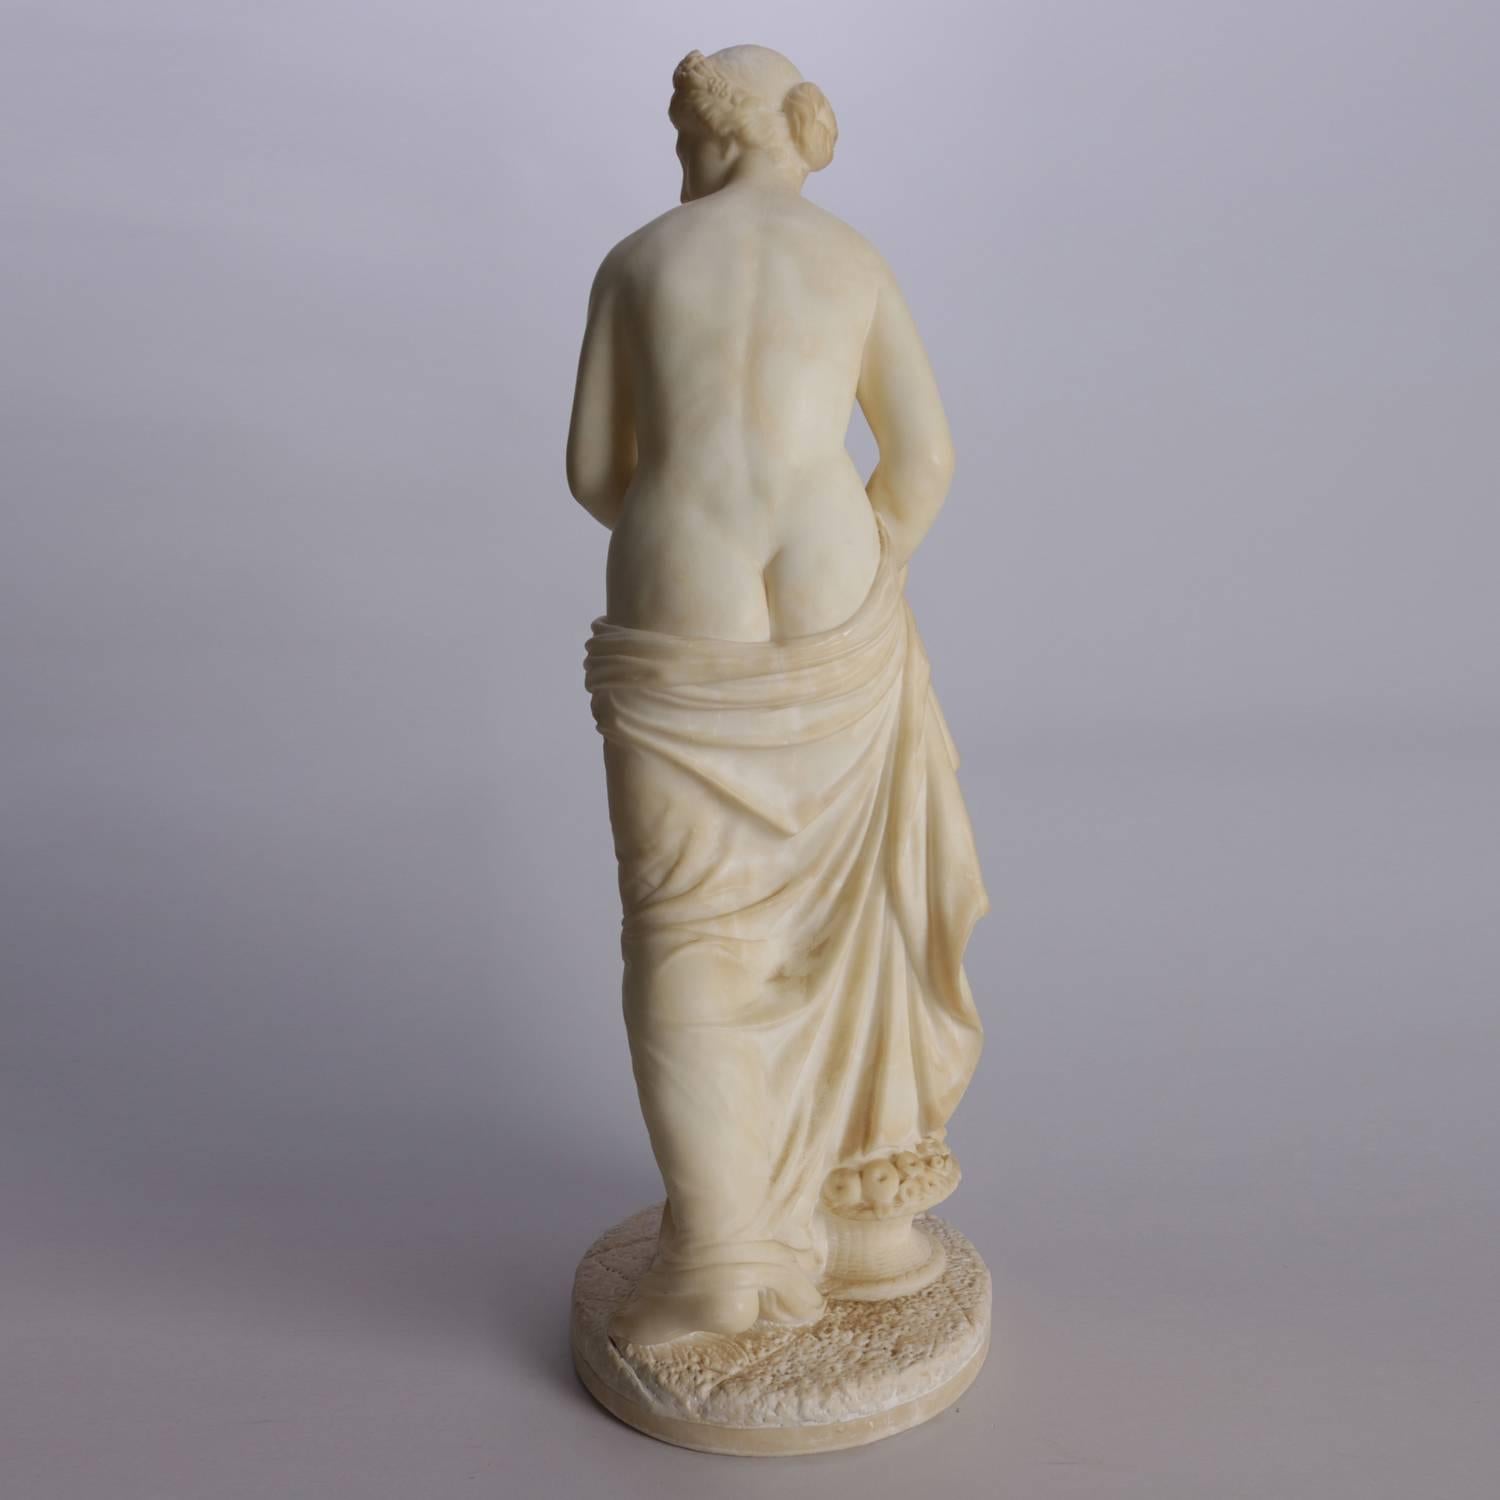 19th Century Antique Italian Carved Alabaster Classical Partial Nude Sculpture of Woman